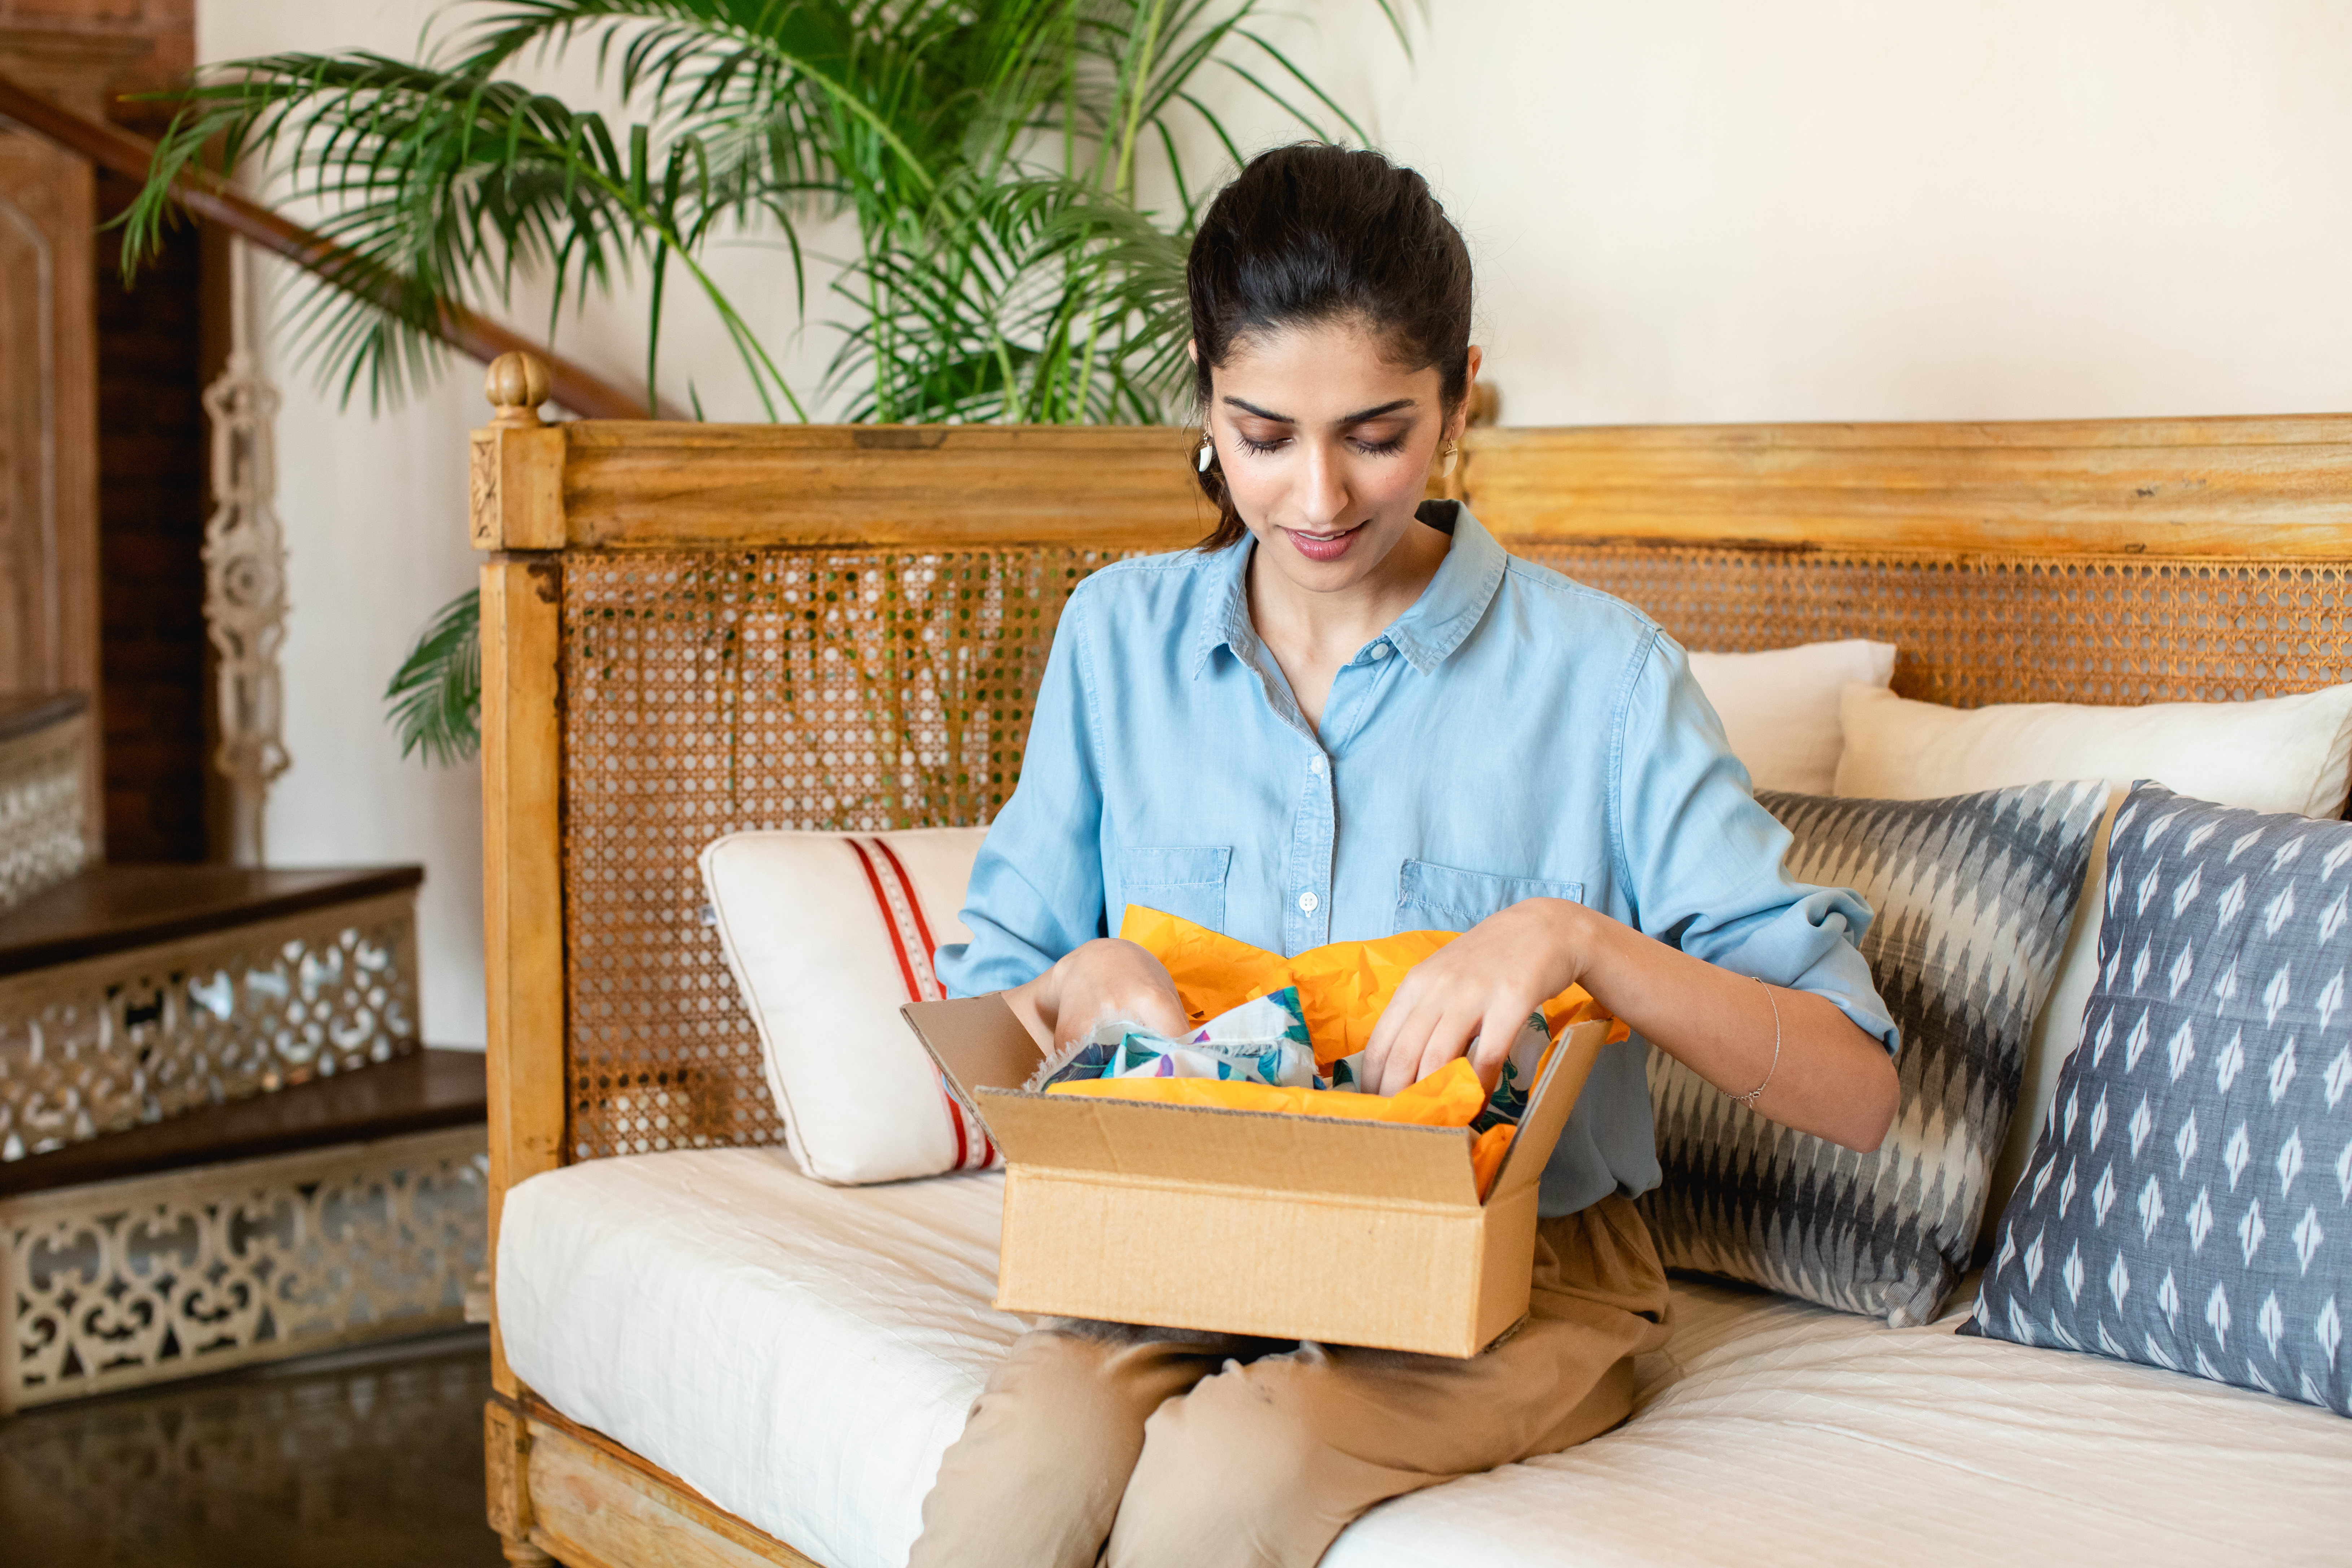 Woman sitting on couch opening up a package of goods in a cardboard box